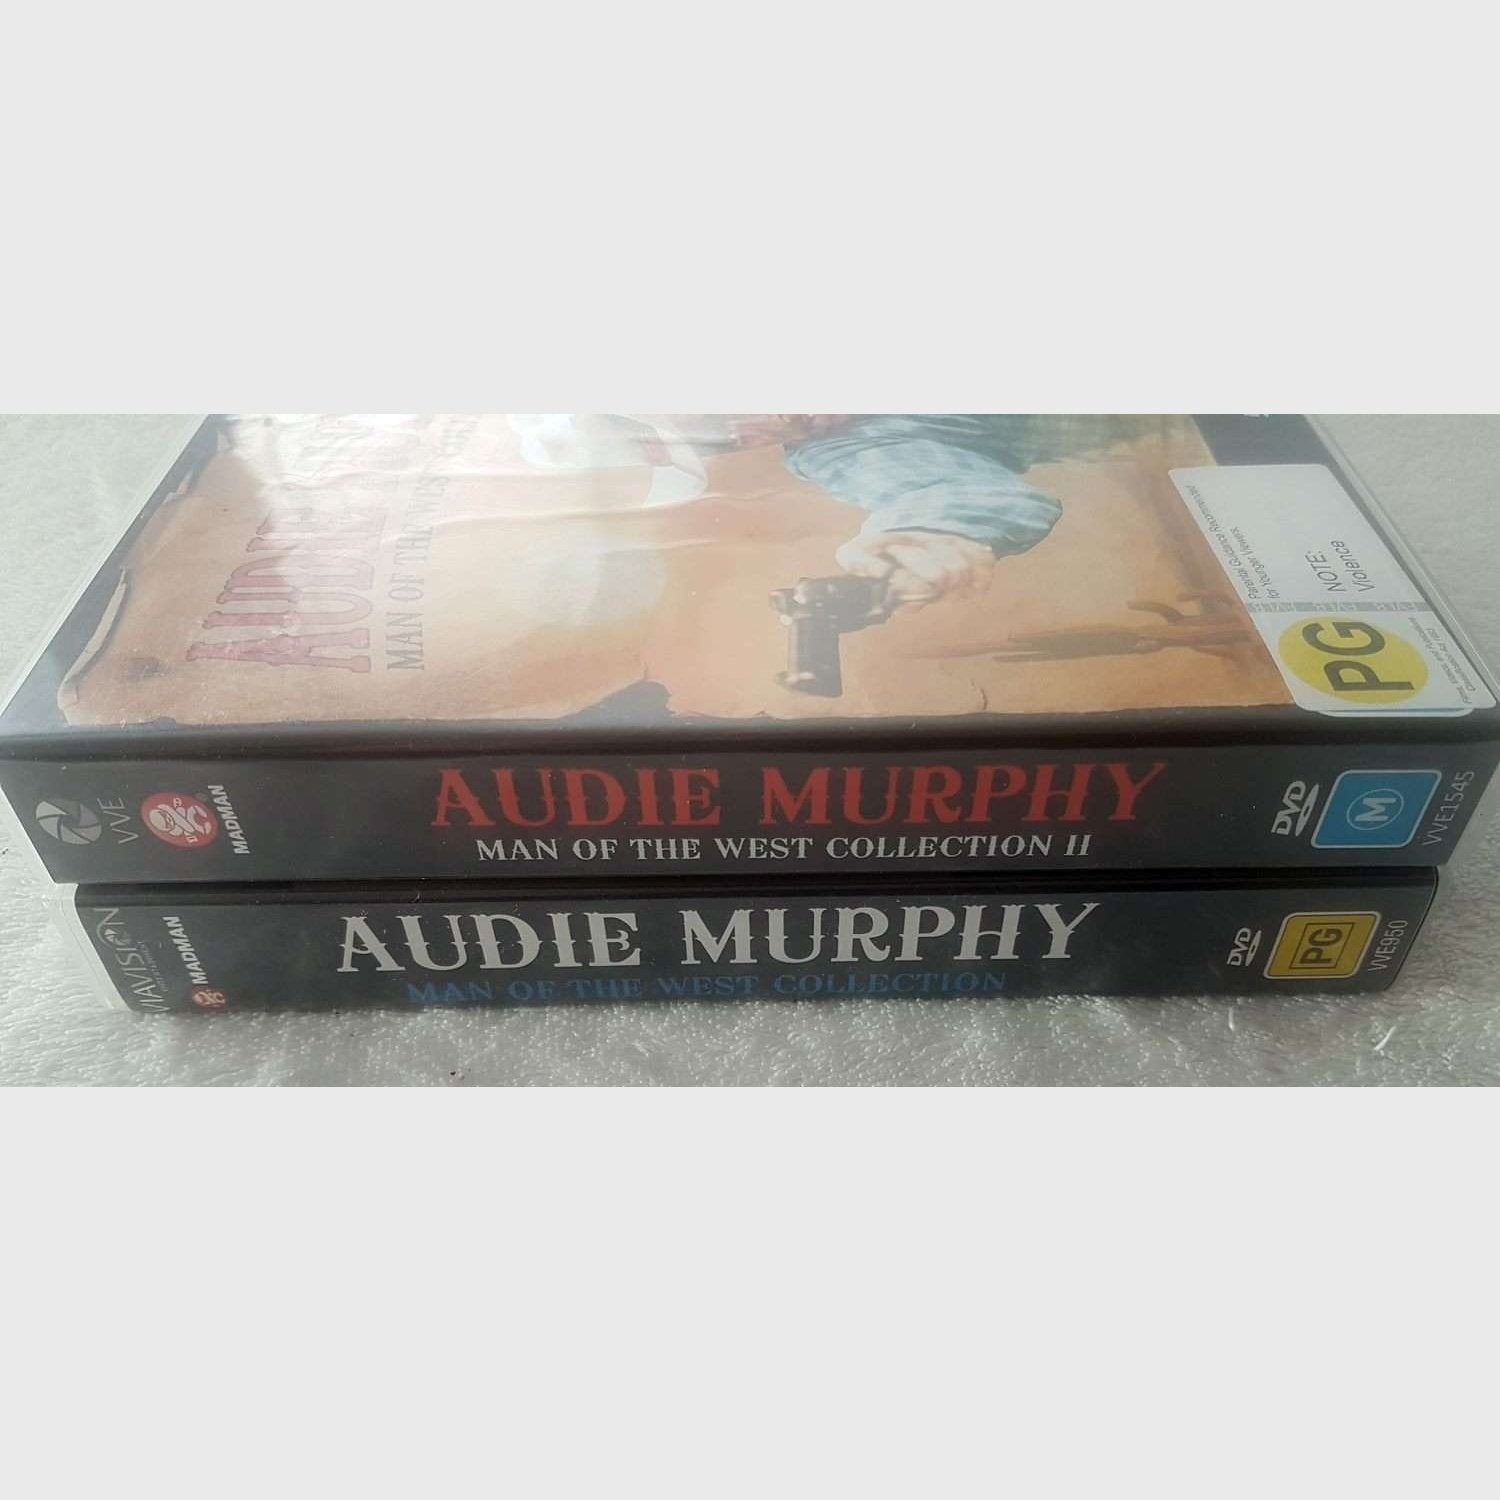 Audie Murphy Man of the West Collection I & II 14 Disc Set